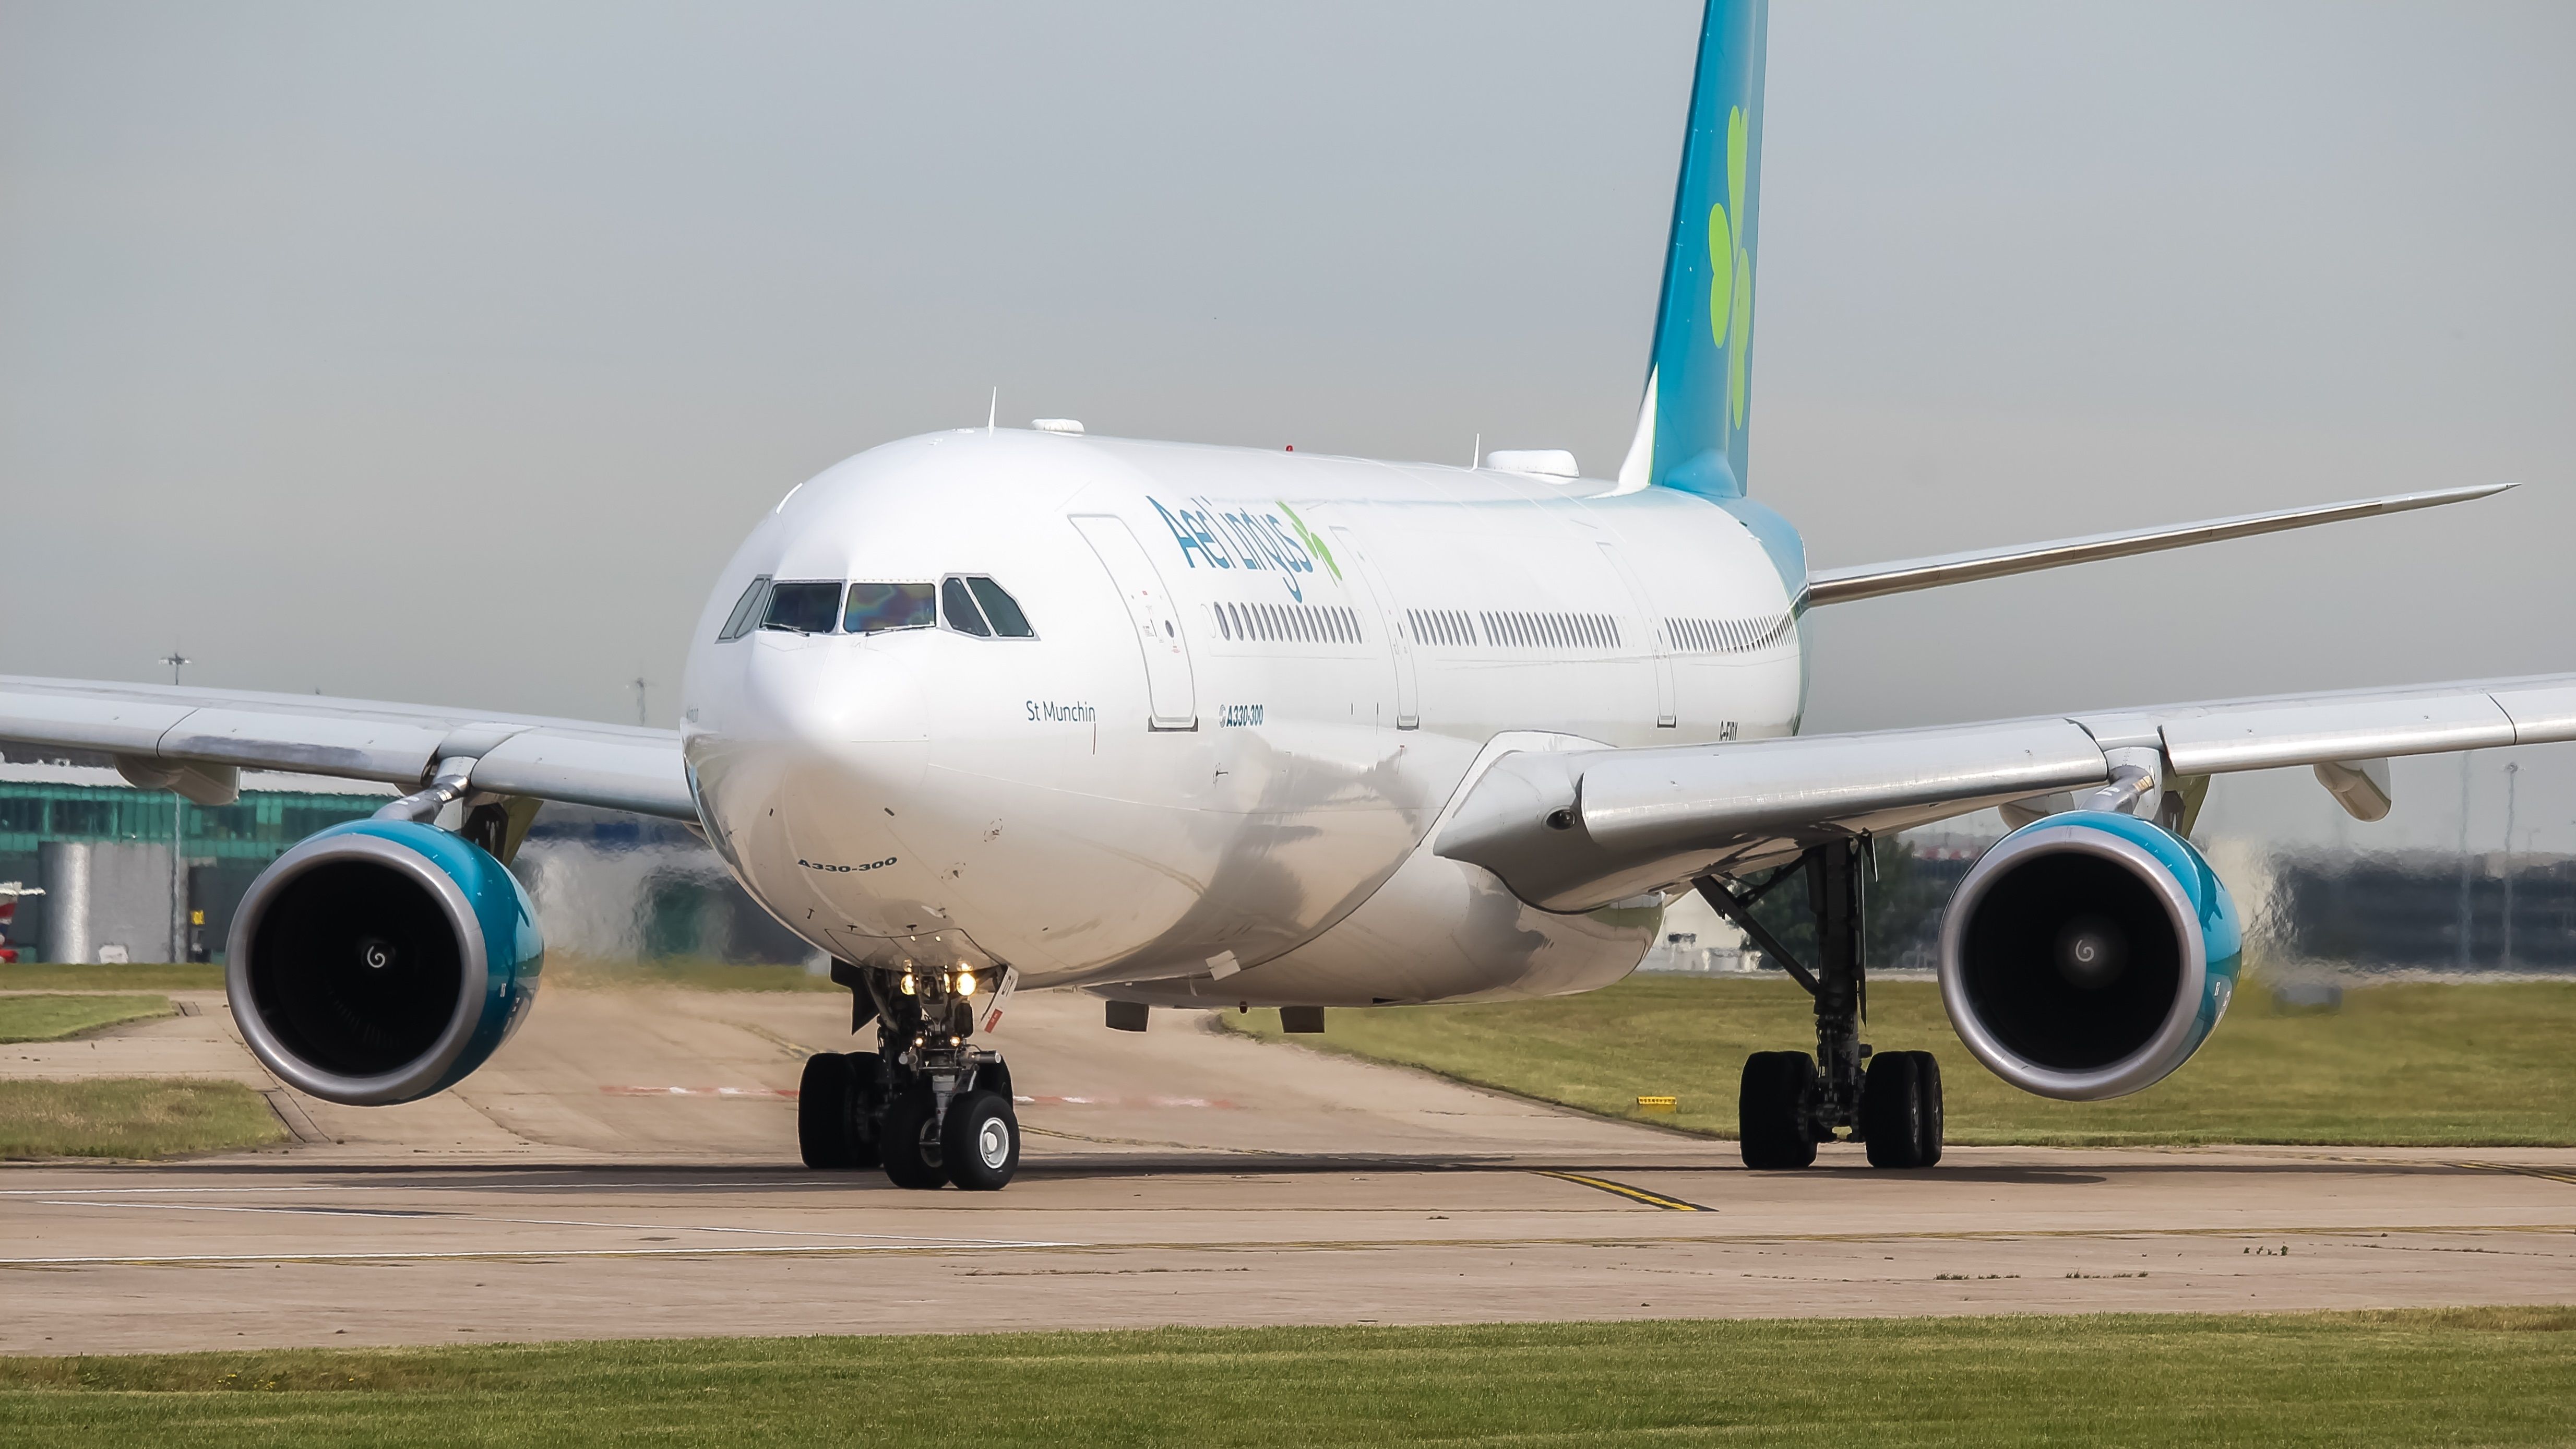 Aer Lingus A330-300 taxiing